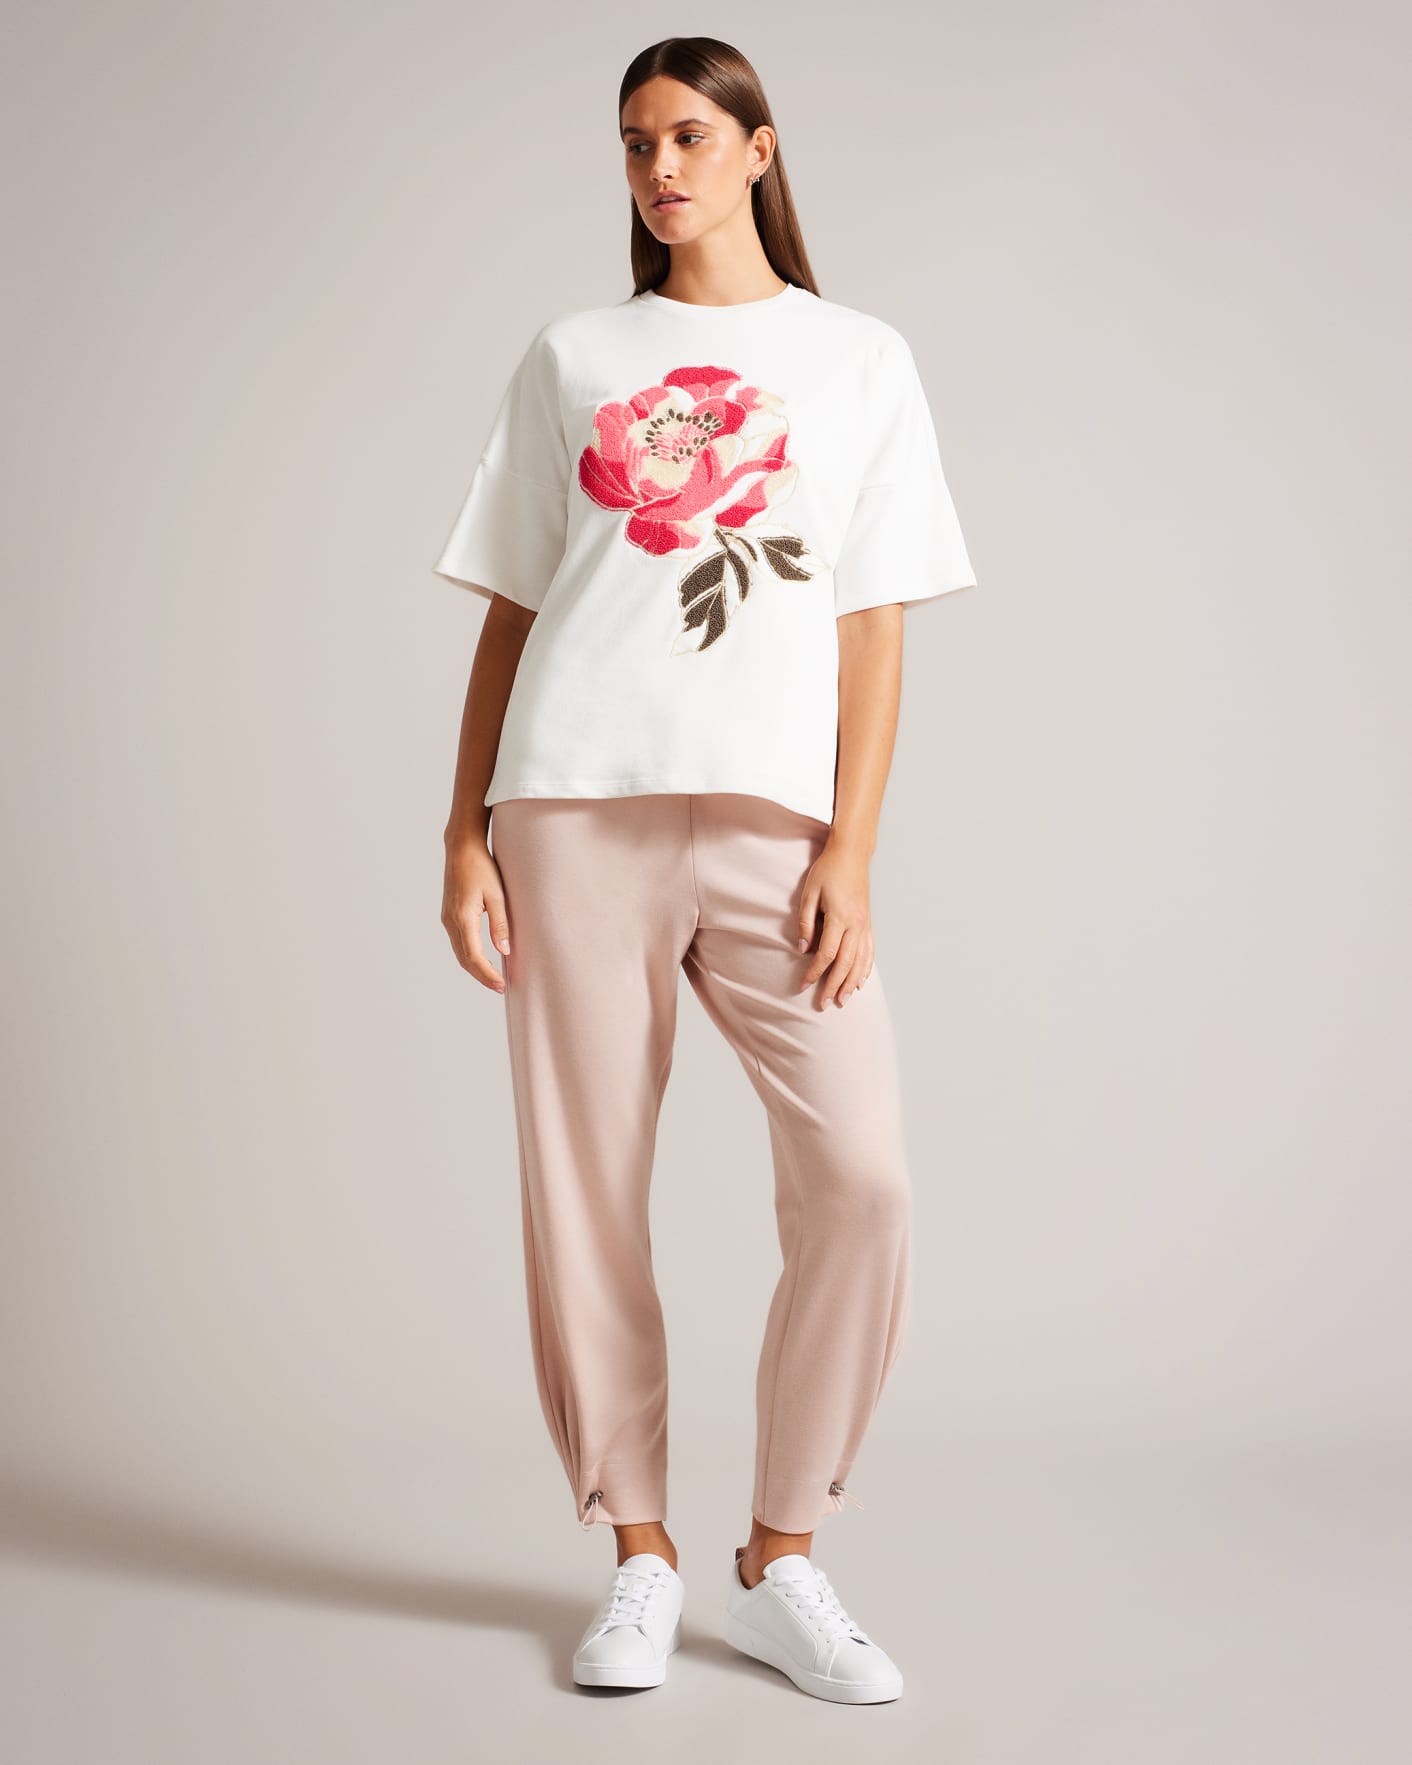 Dusky Pink Joggers With Pleated Cuff Ted Baker